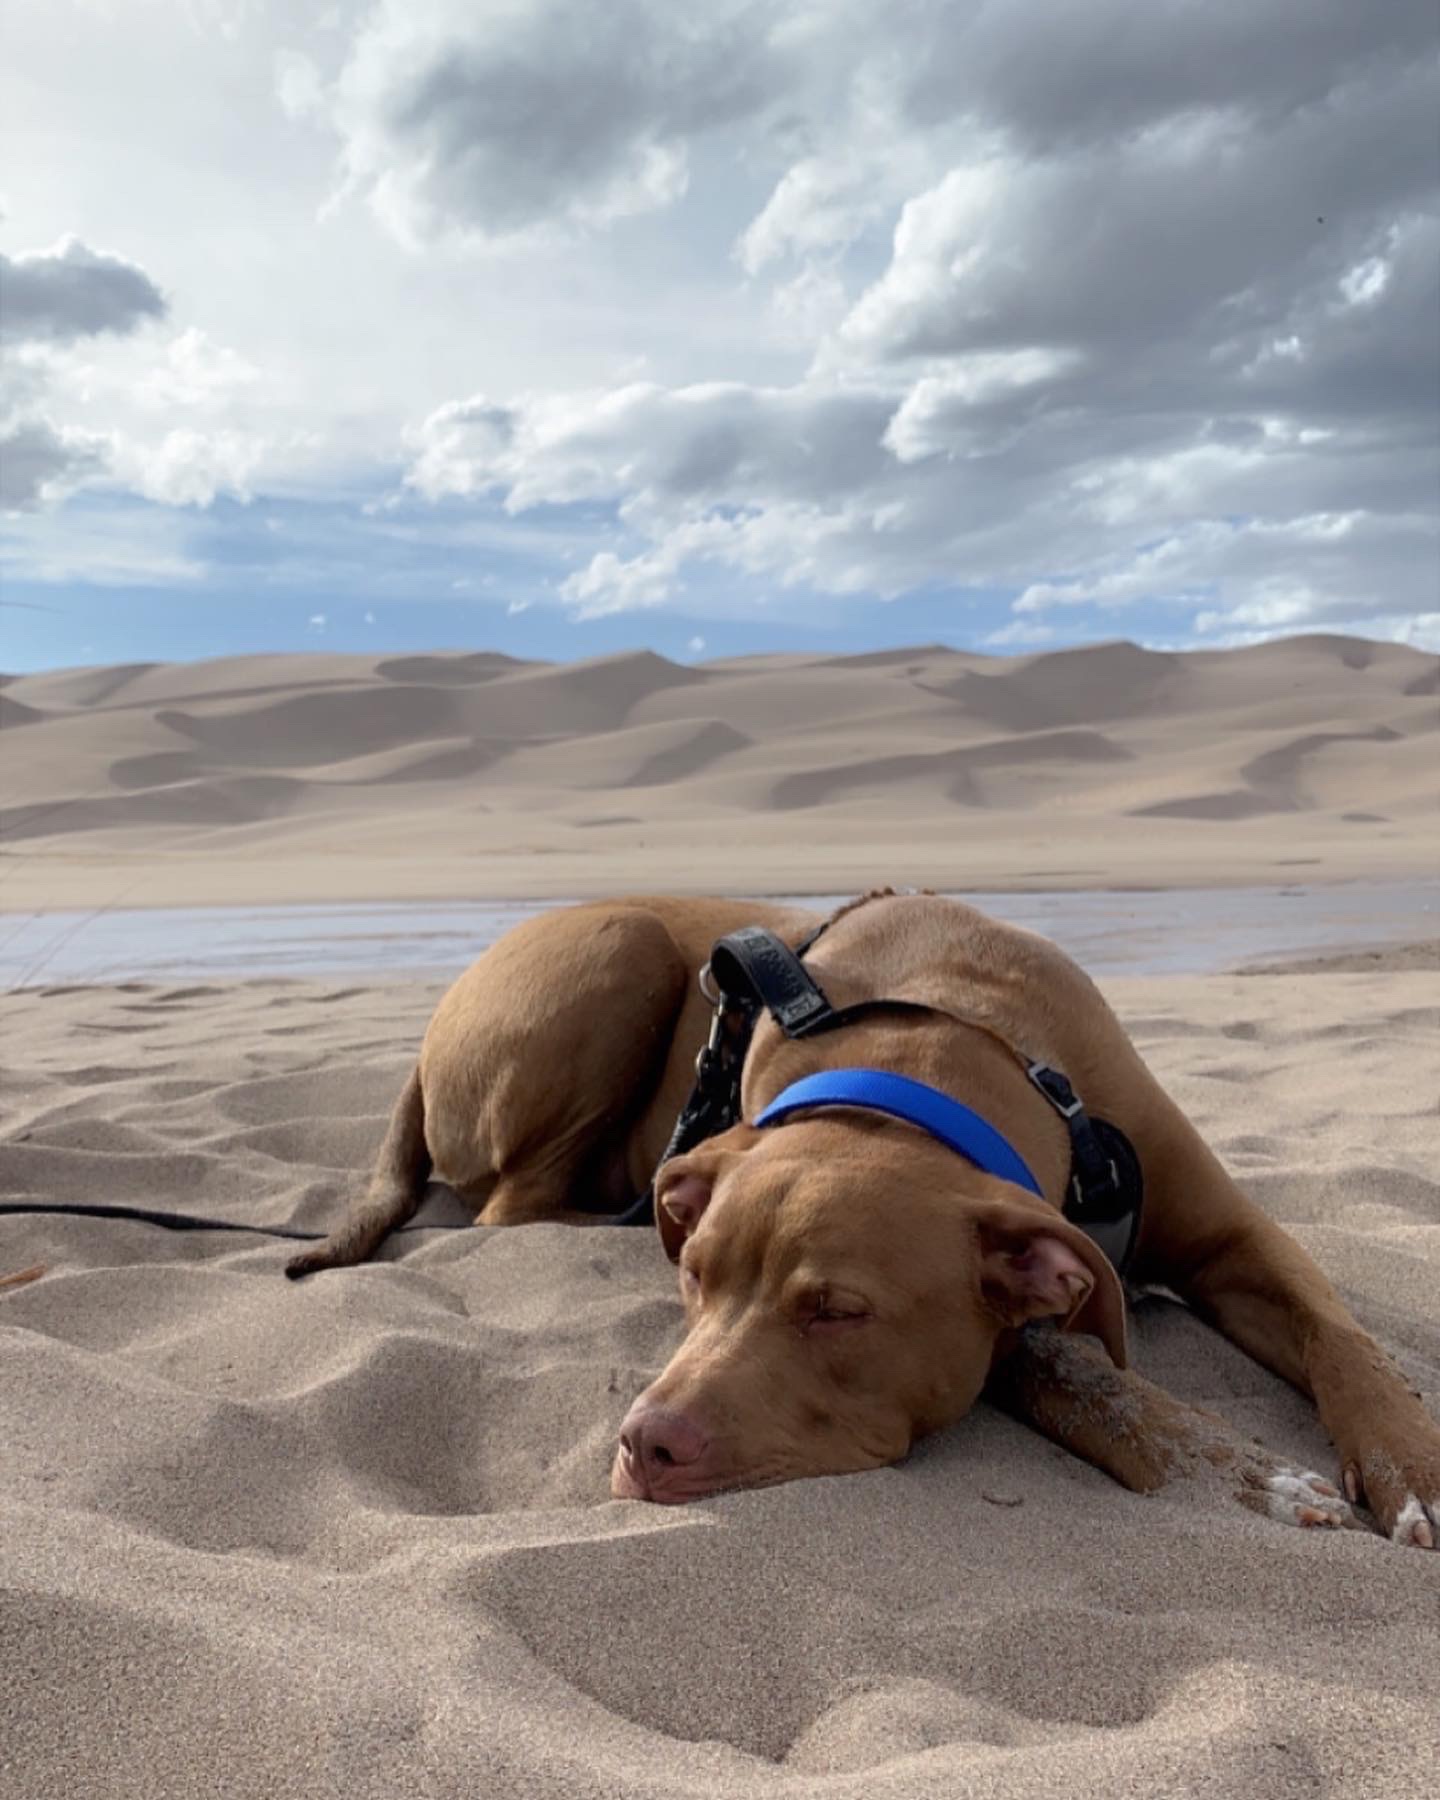 Hiro napping on the warm sand after playing in the water for hours.